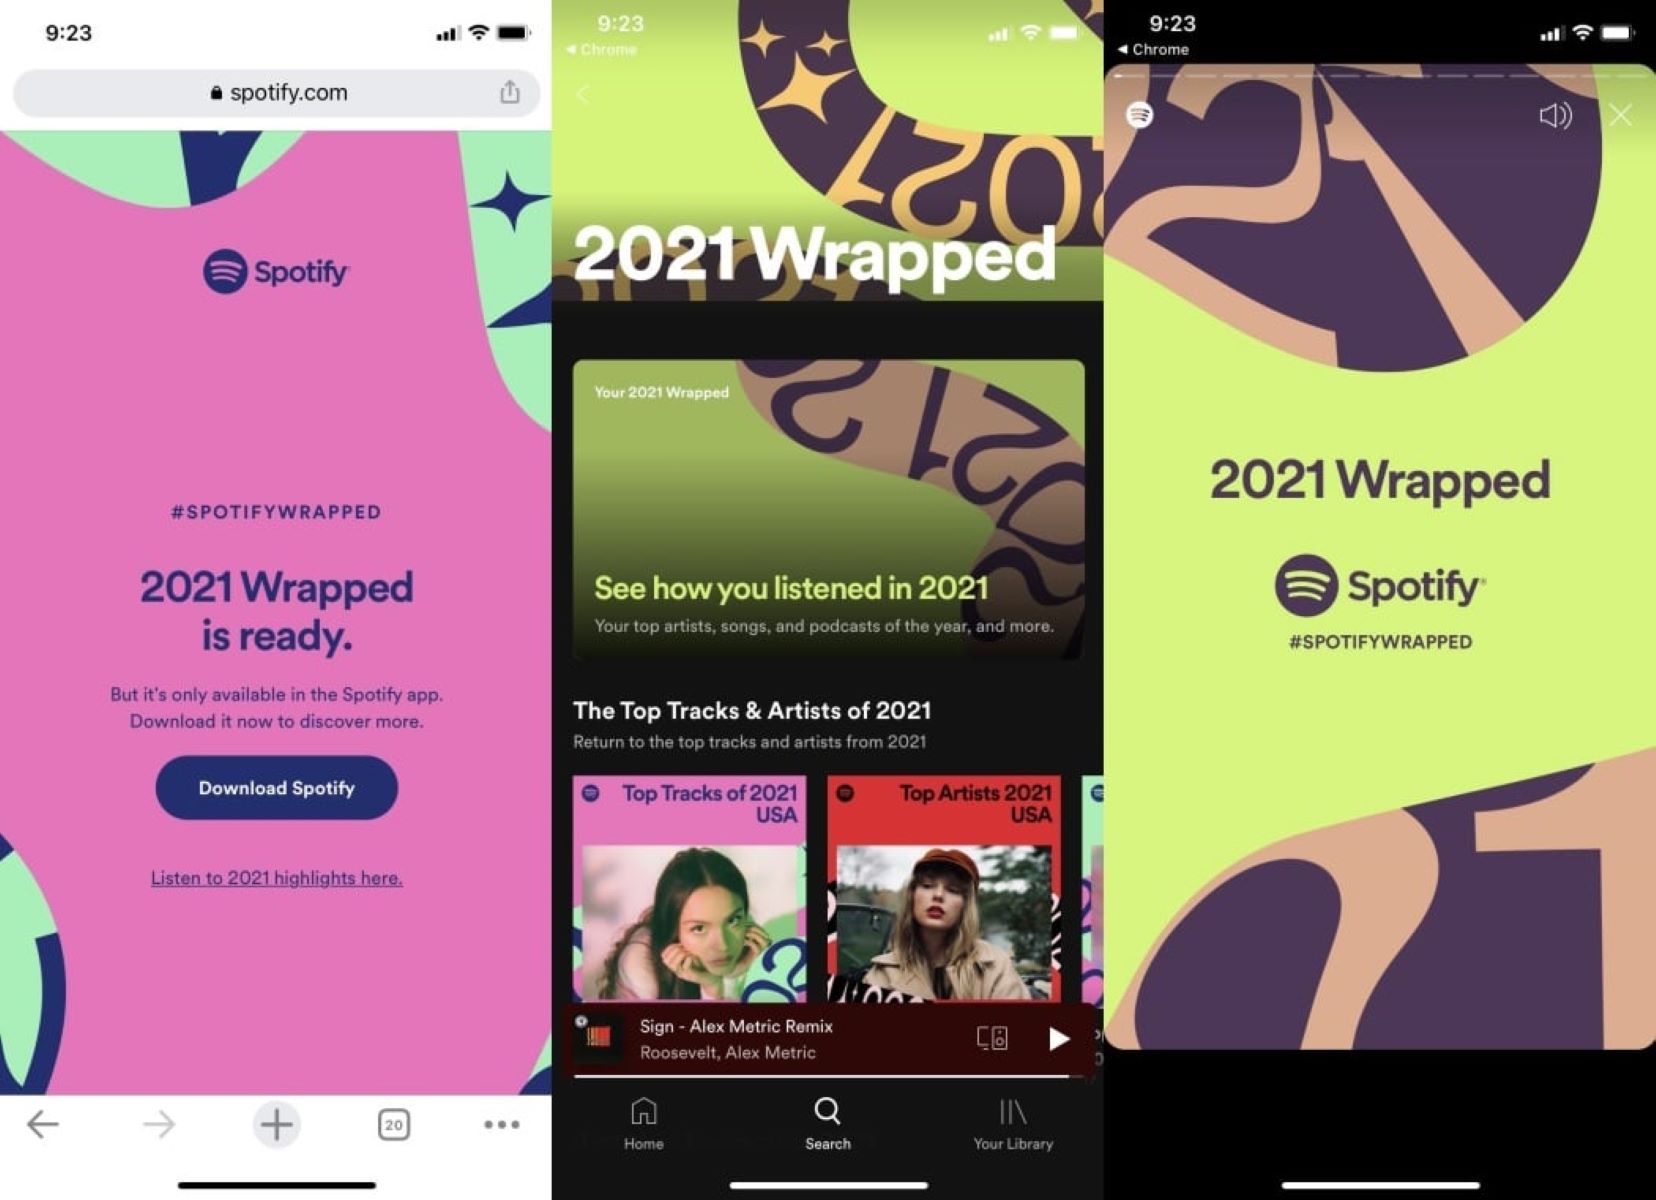 How To See Spotify Wrapped 2021